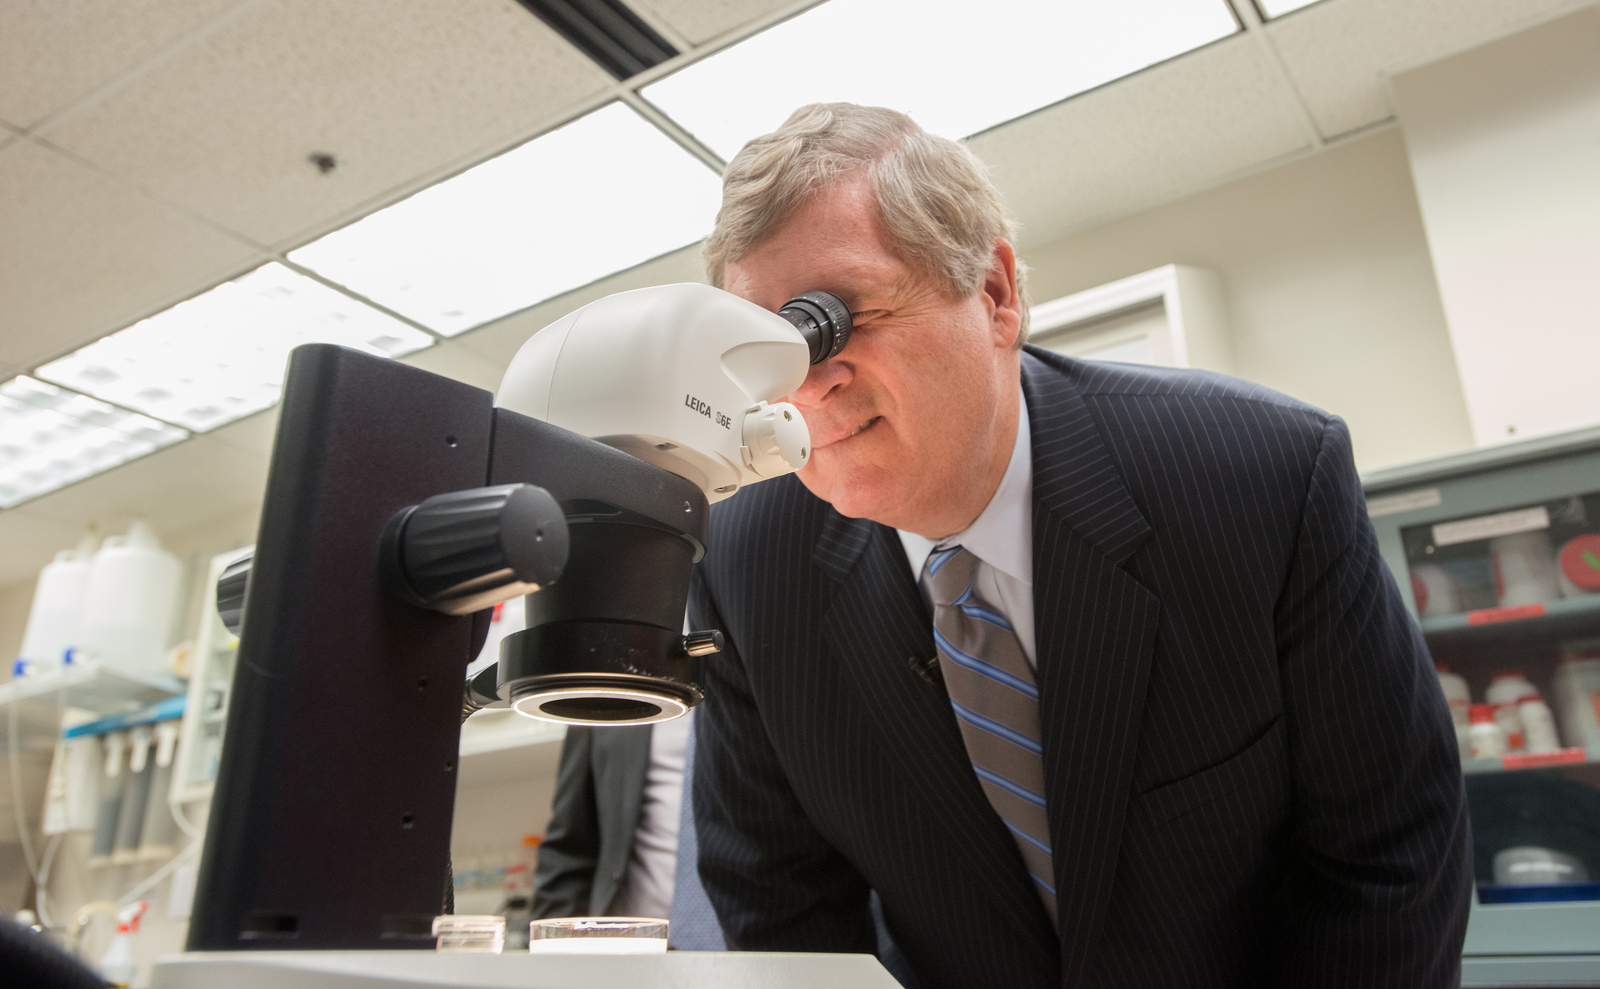 Agriculture Secretary Tom Vilsack looks into a microscope